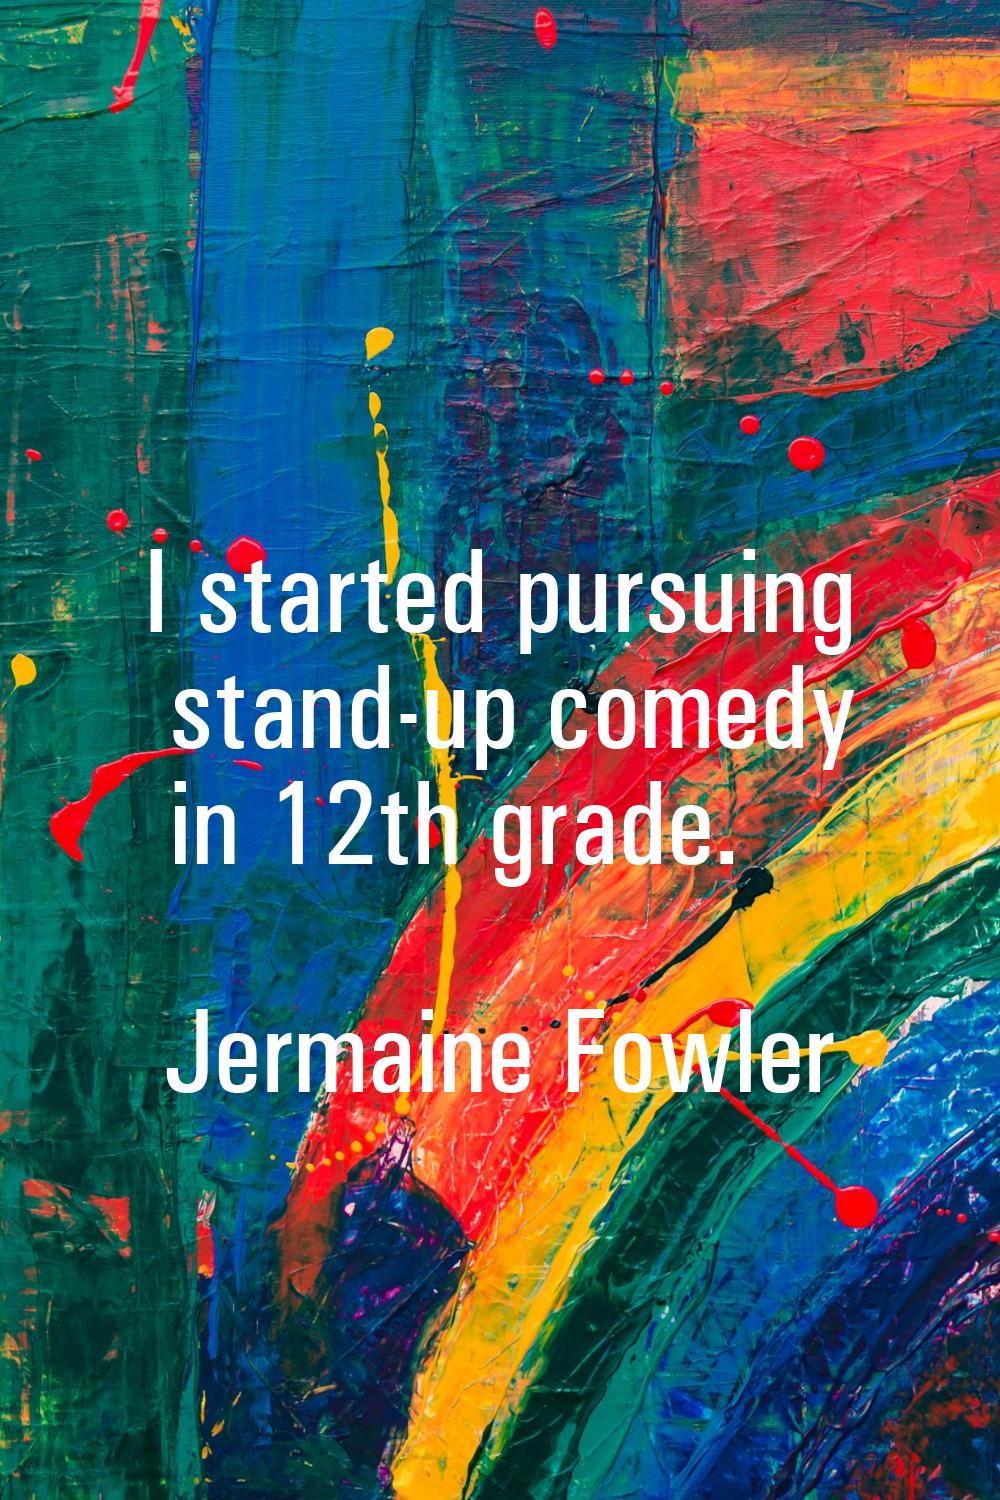 I started pursuing stand-up comedy in 12th grade.